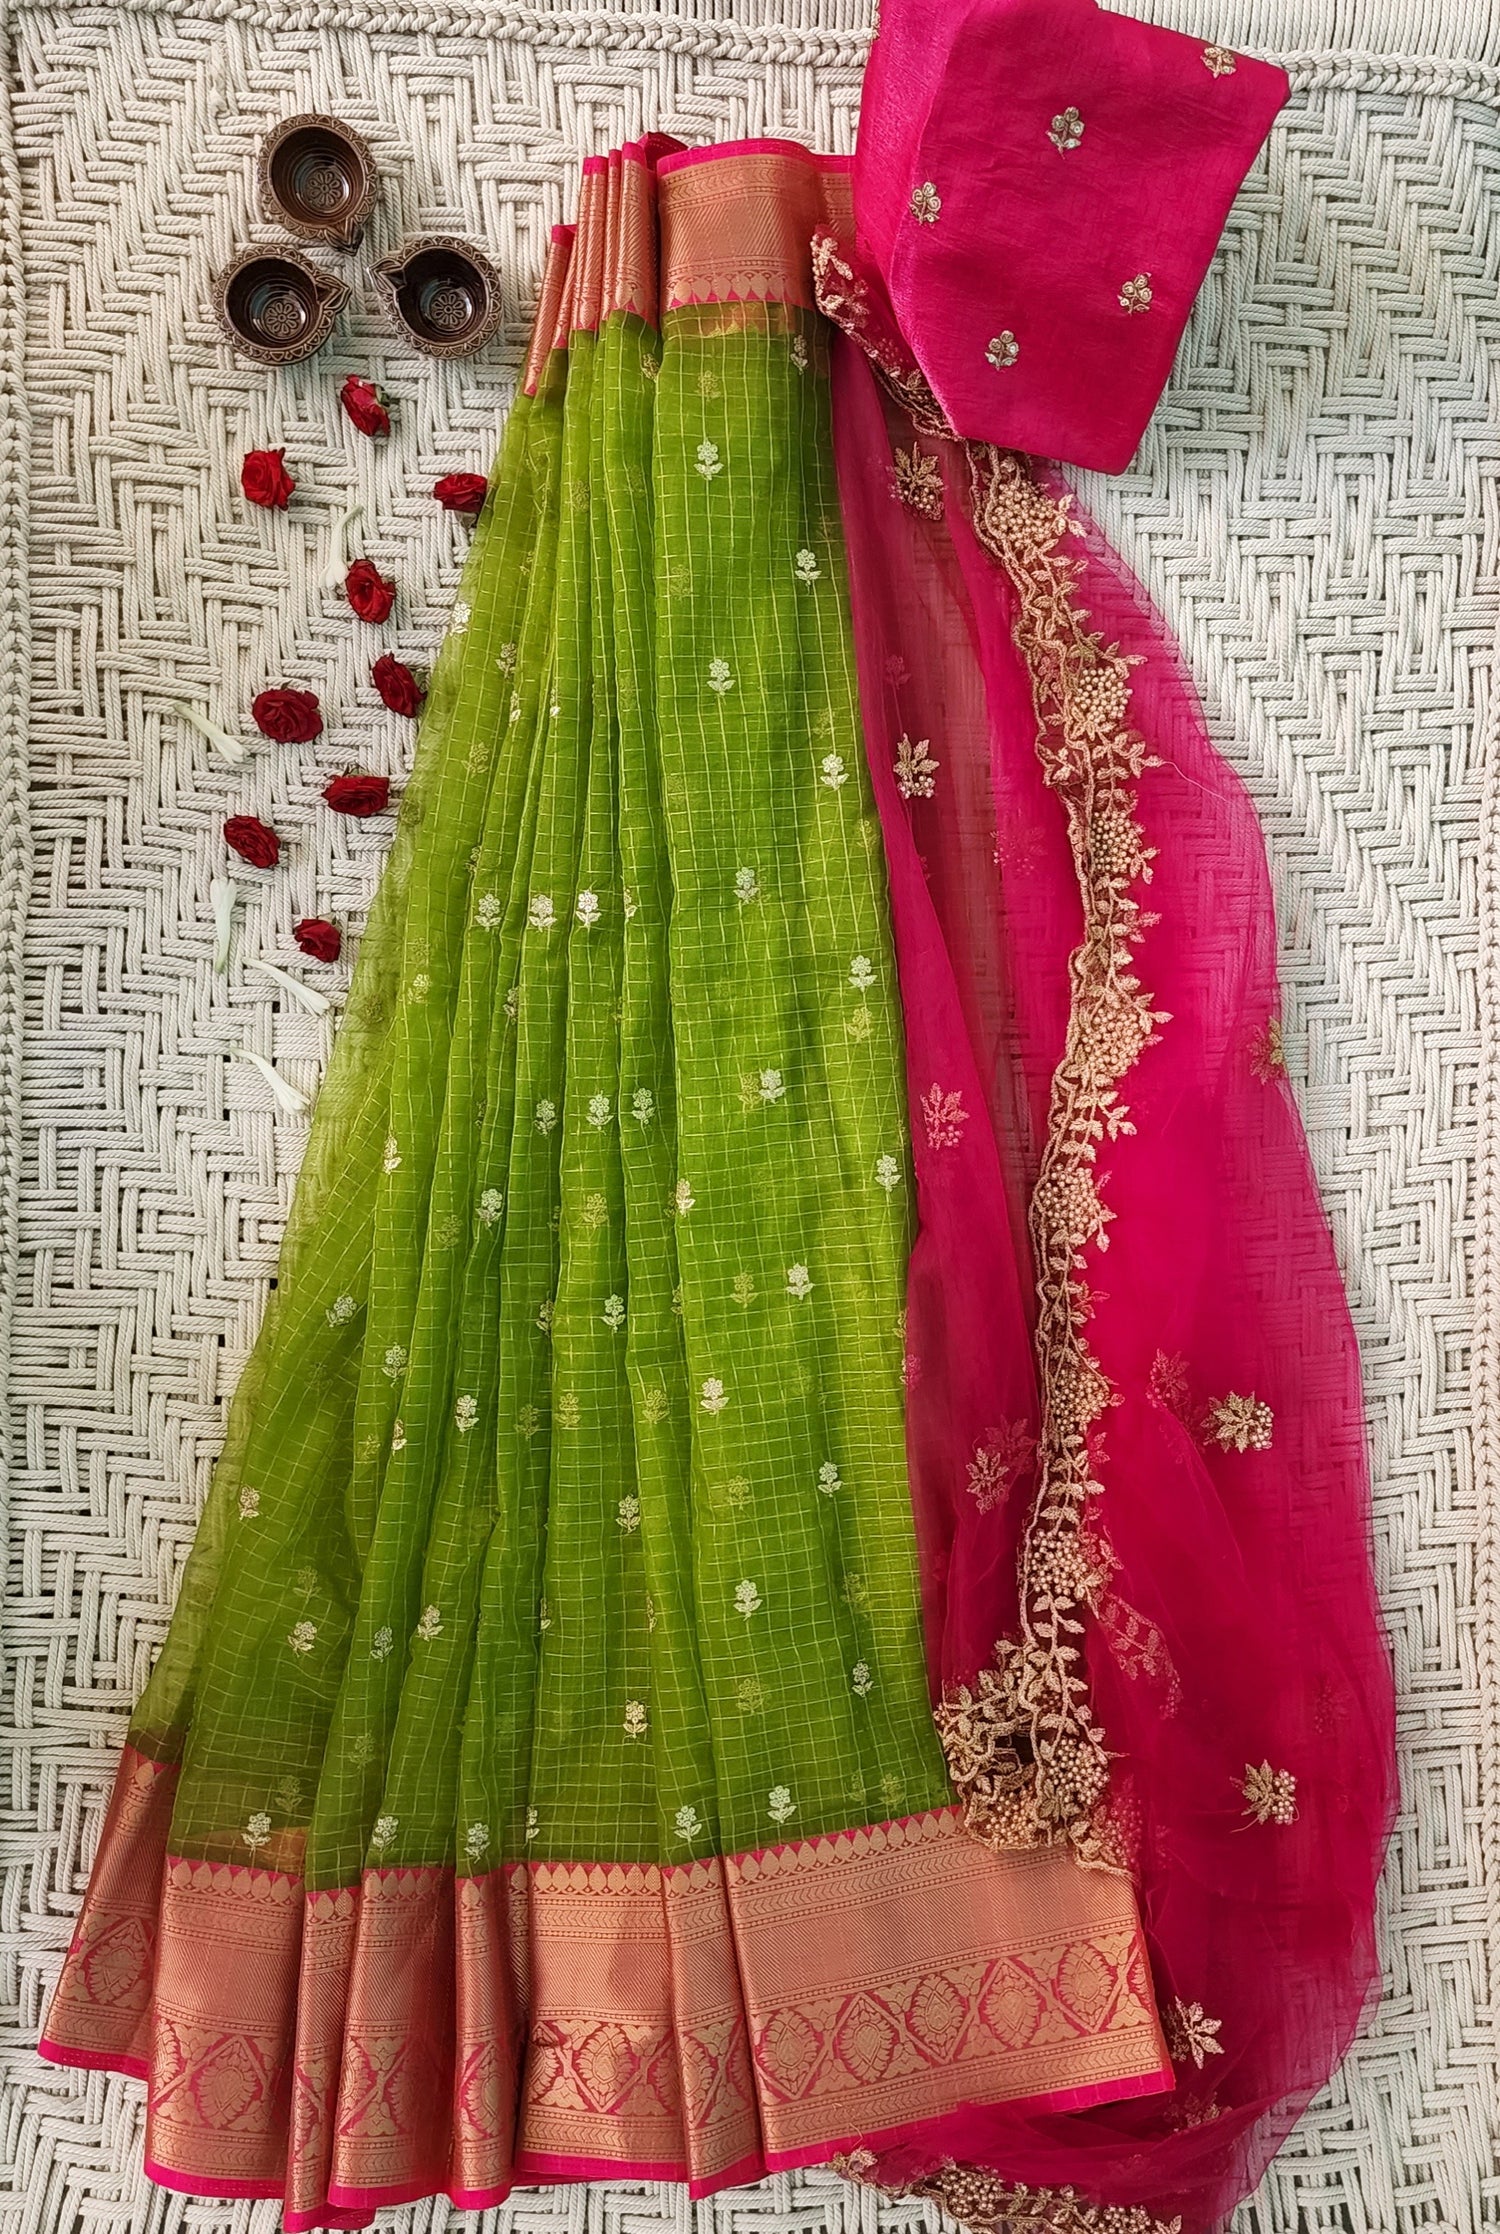 Ghagra Sadi in Pune - Dealers, Manufacturers & Suppliers - Justdial